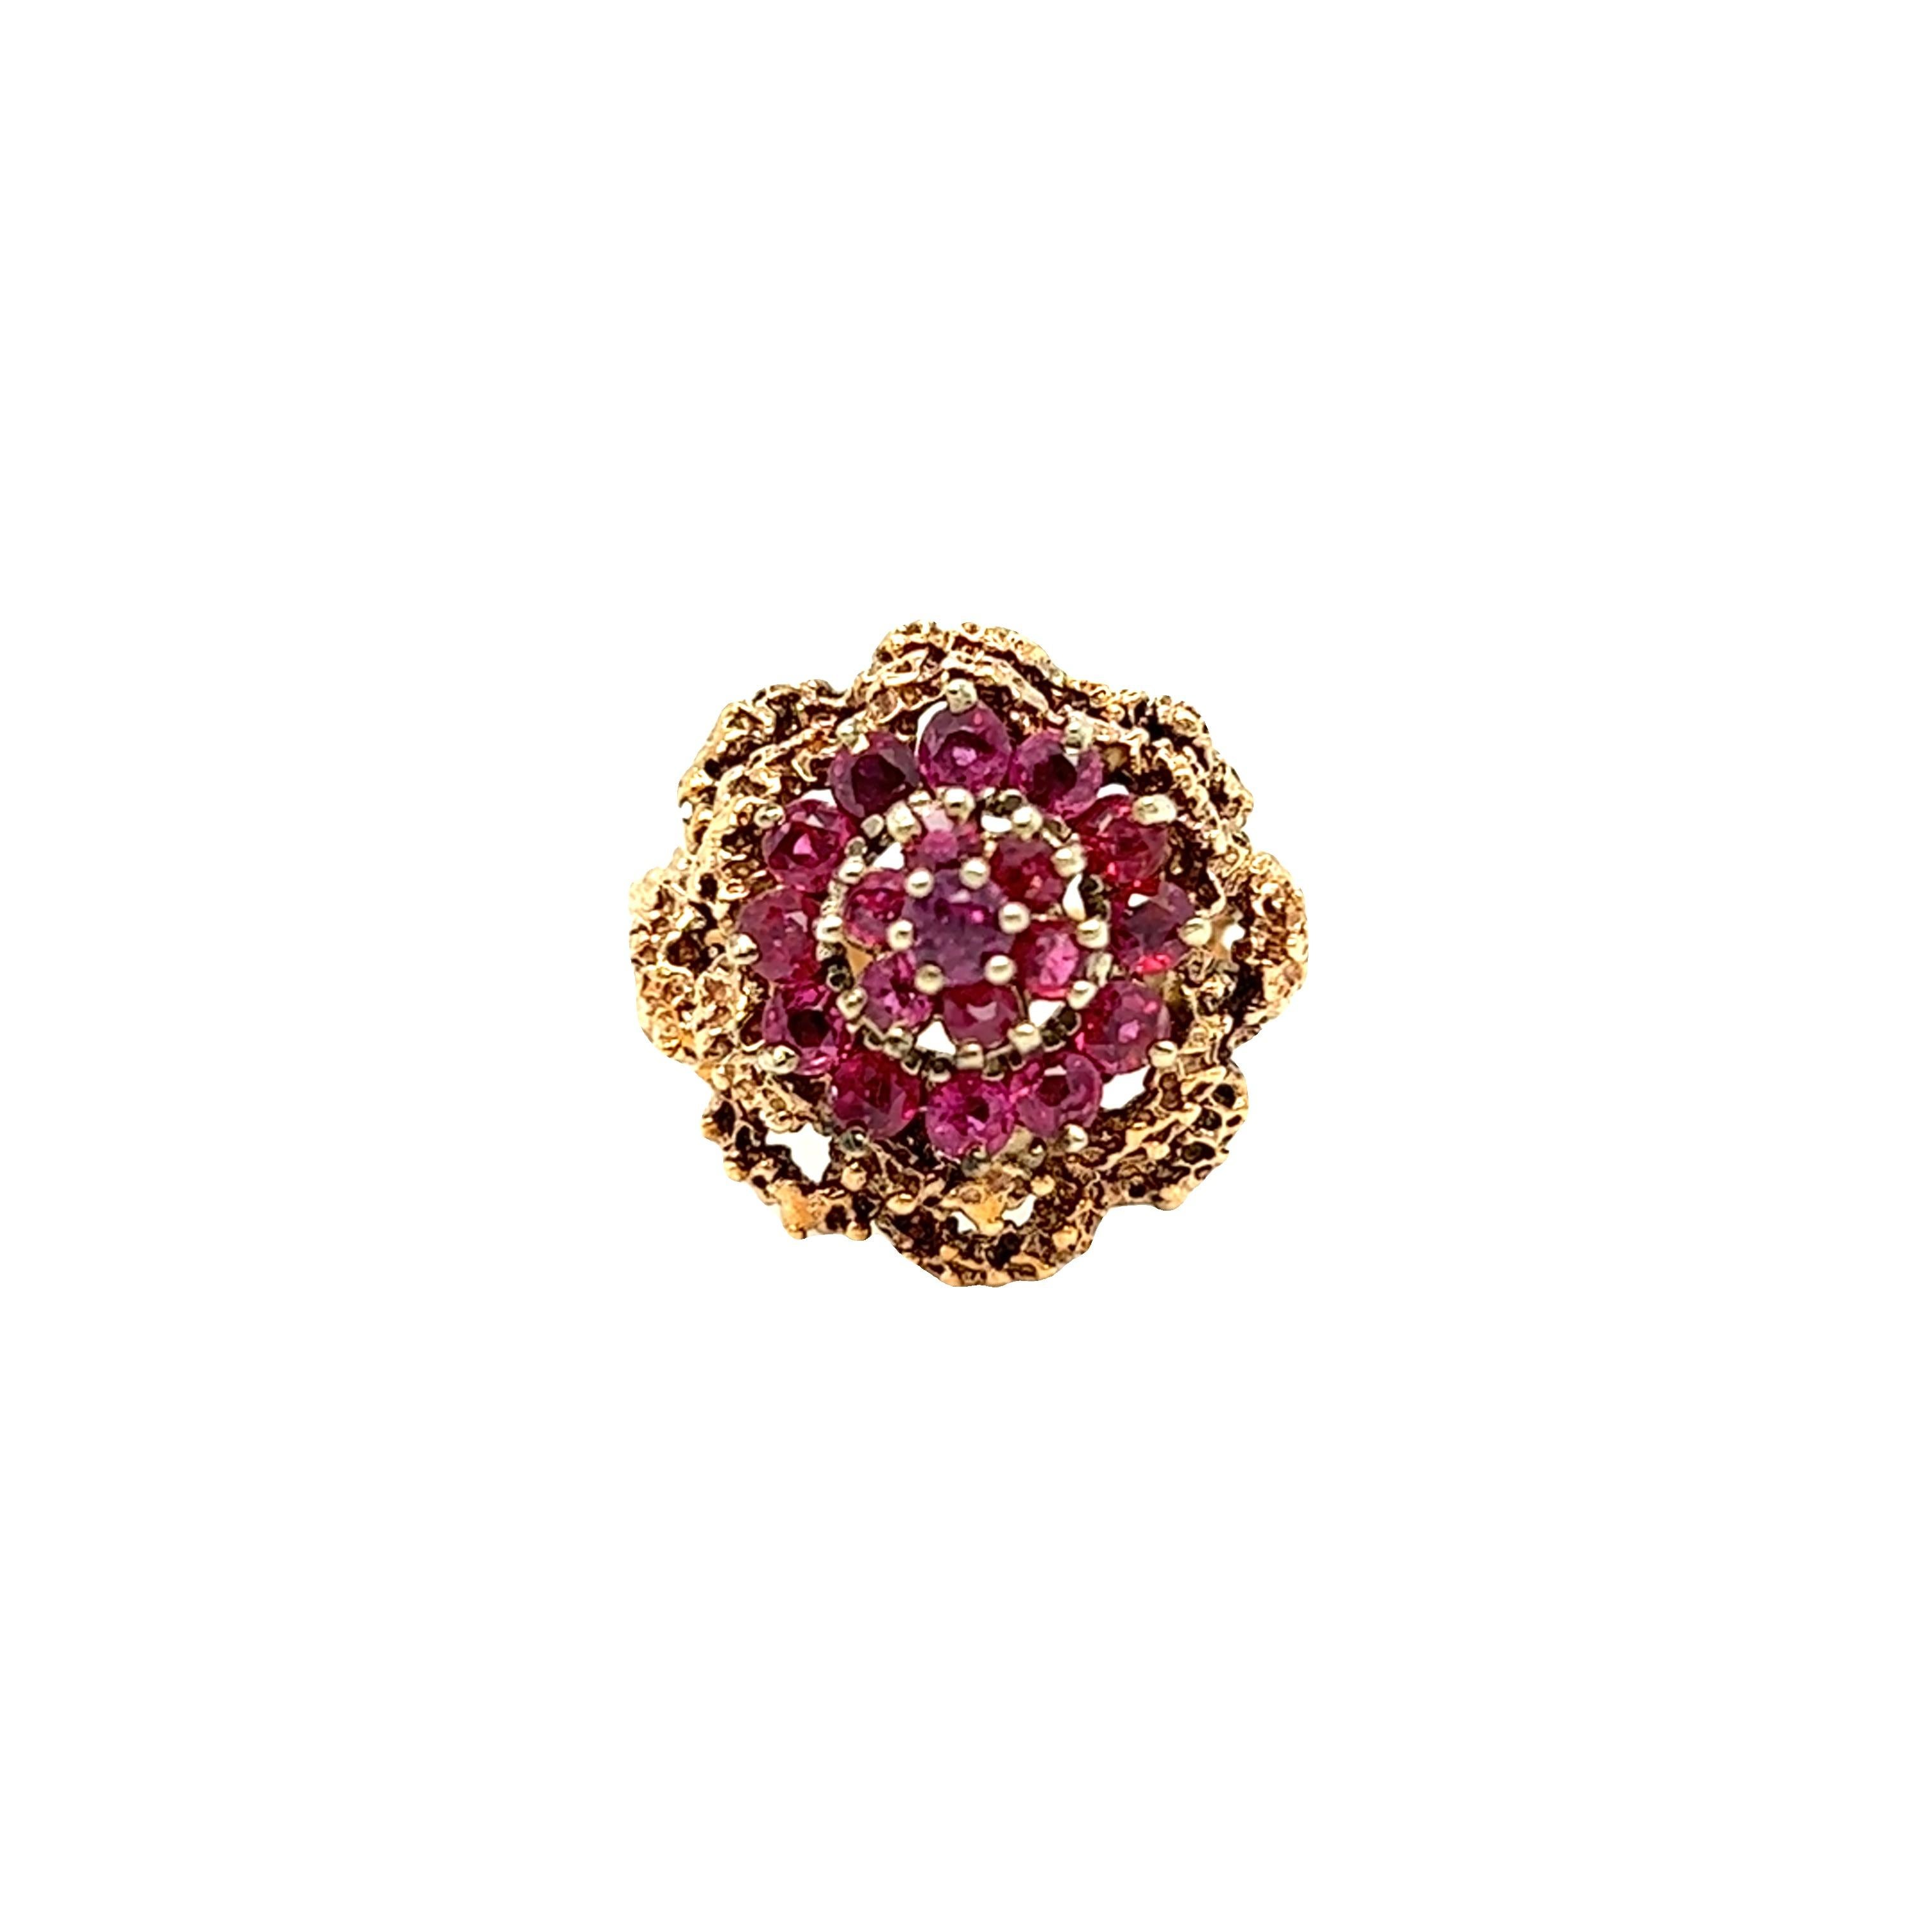 This Brutalist style ring features 19 rubies set in floral dome shaped ring. It is crafted in 14k yellow gold. The total weight of ruby is approximately 1 carat. The ring is currently in a size 6 and can be resized.  

Gross weight: 8.7 grams
size 6